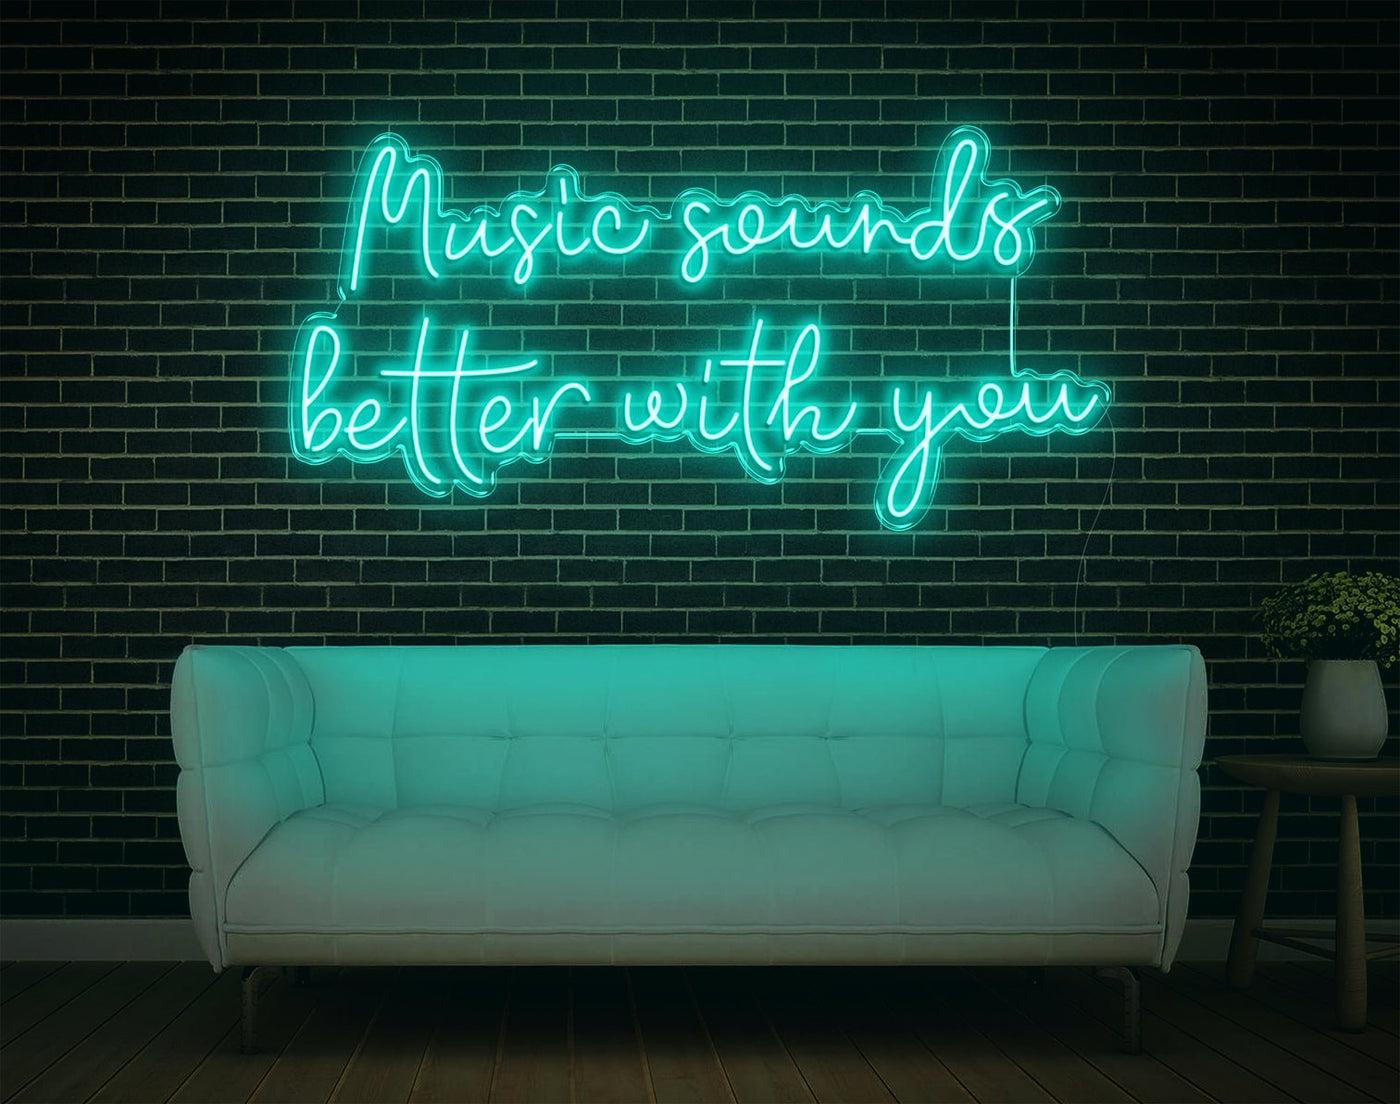 Music Sounds Better With You LED Neon Sign - 23inch x 48inchHot Pink